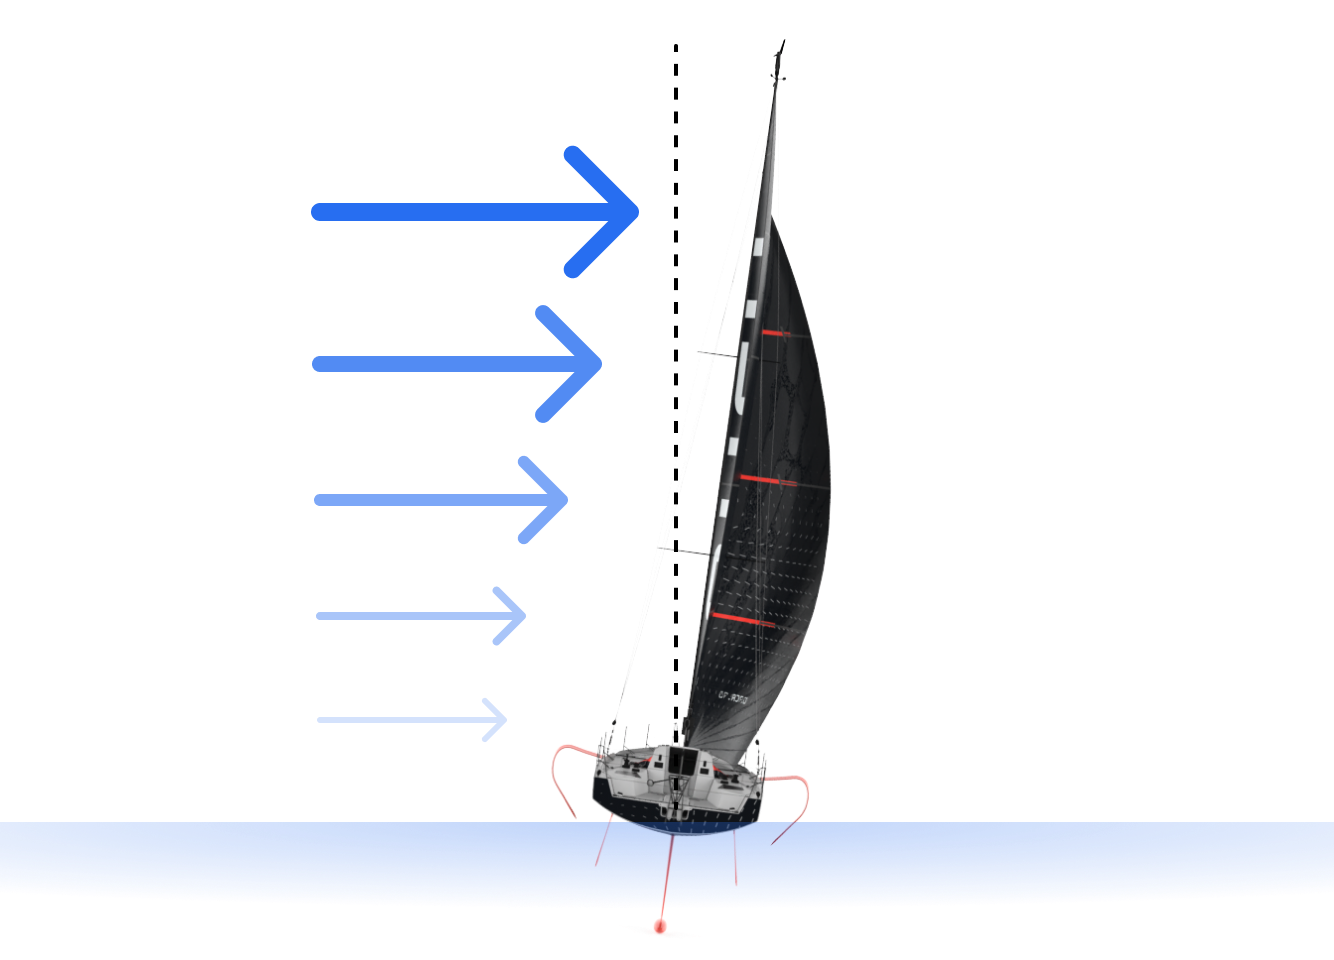 At low wind speeds, the Wind Gradient will cause your wind sensor to report higher wind speeds than what your sail is experiencing.